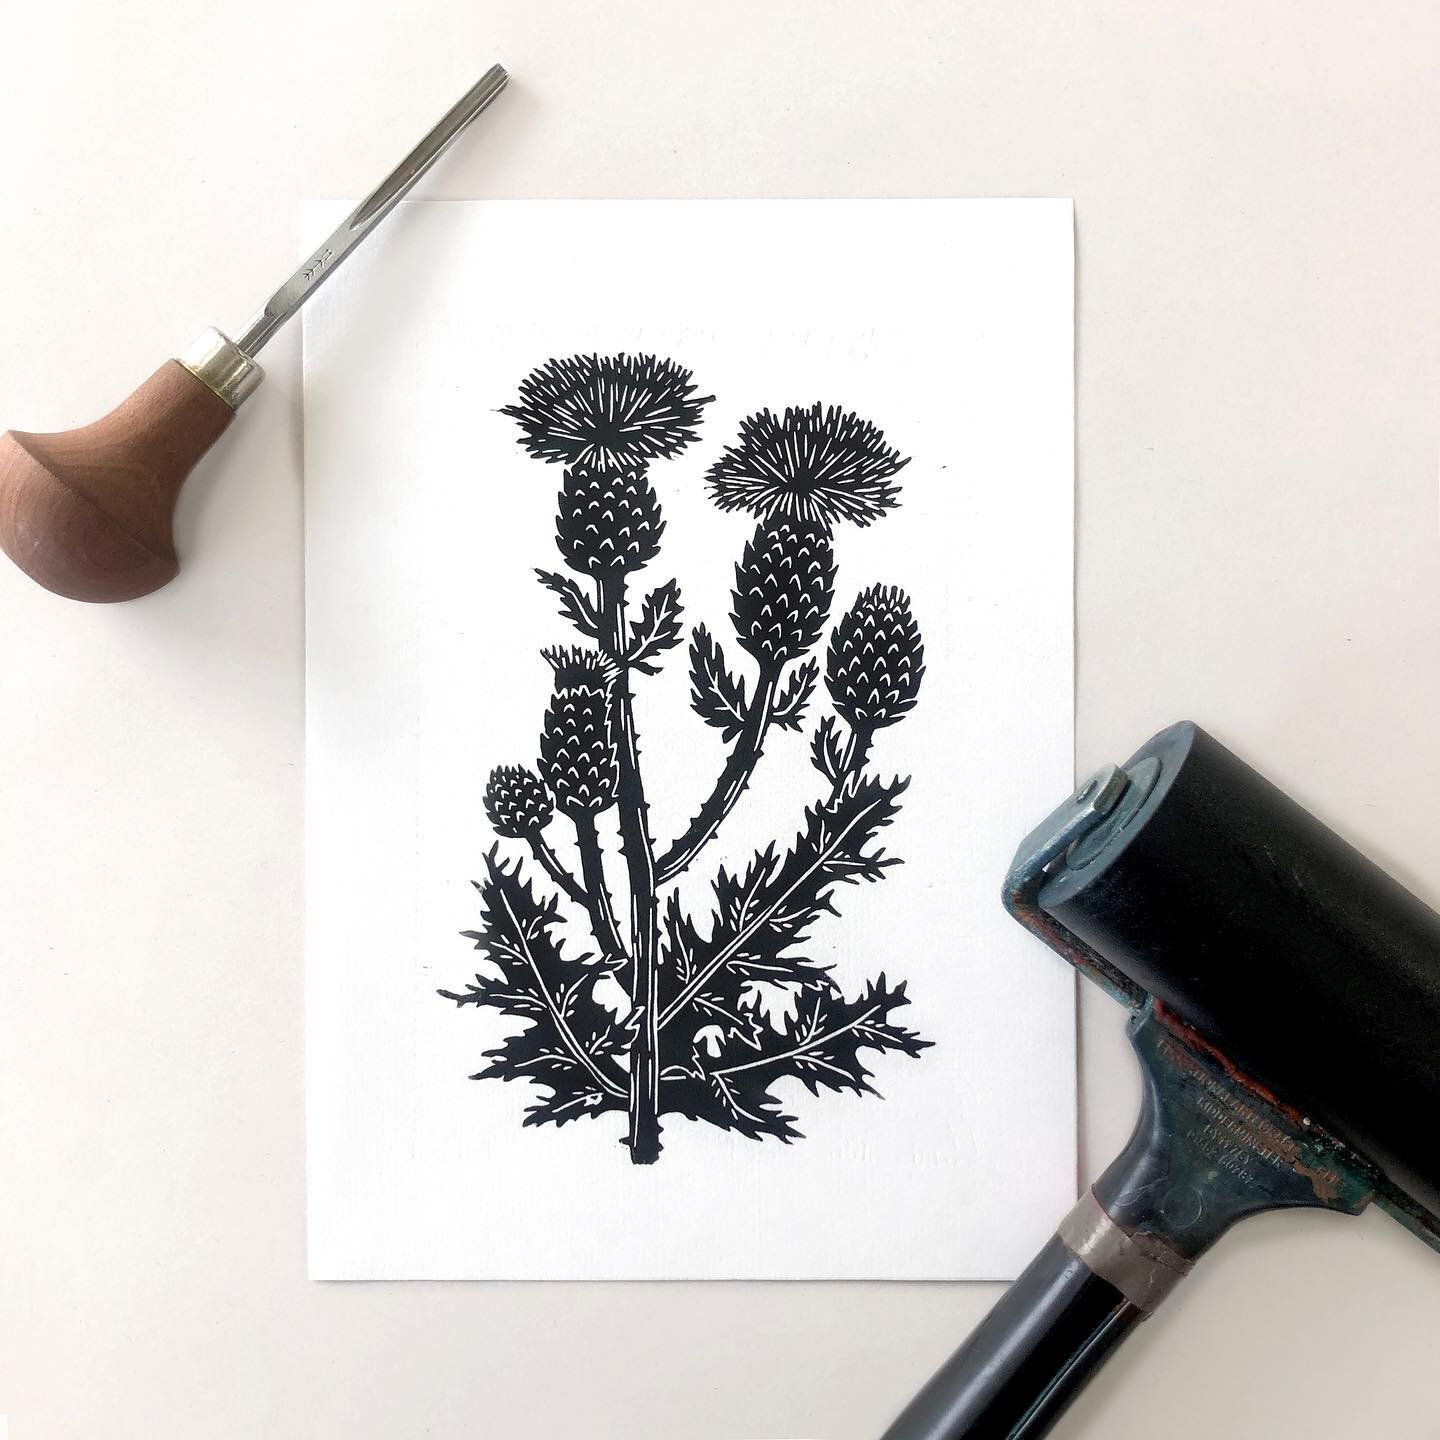 Latest linocut printed at @lawrenceprintmaking this week. Currently working on the other 2 designs that will complete this little trio of botanical prints inspired buy Norfolk seaside walks. Looking forward to getting them framed together once they&r